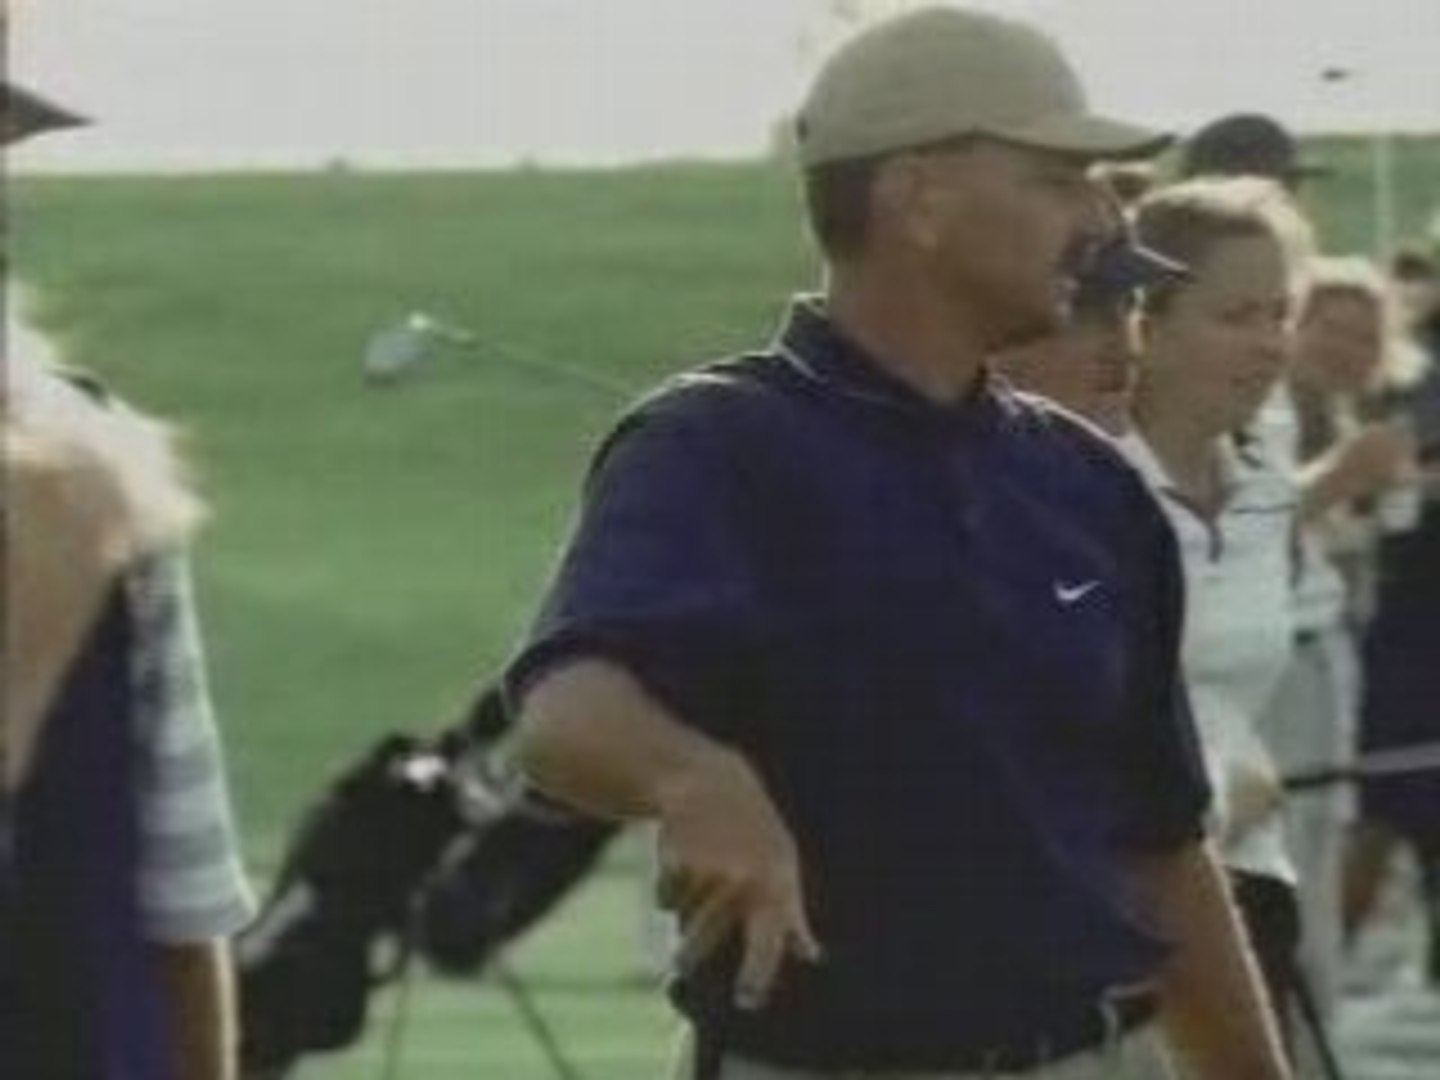 Nike golf commercial tiger woods driving range Vidéo Dailymotion